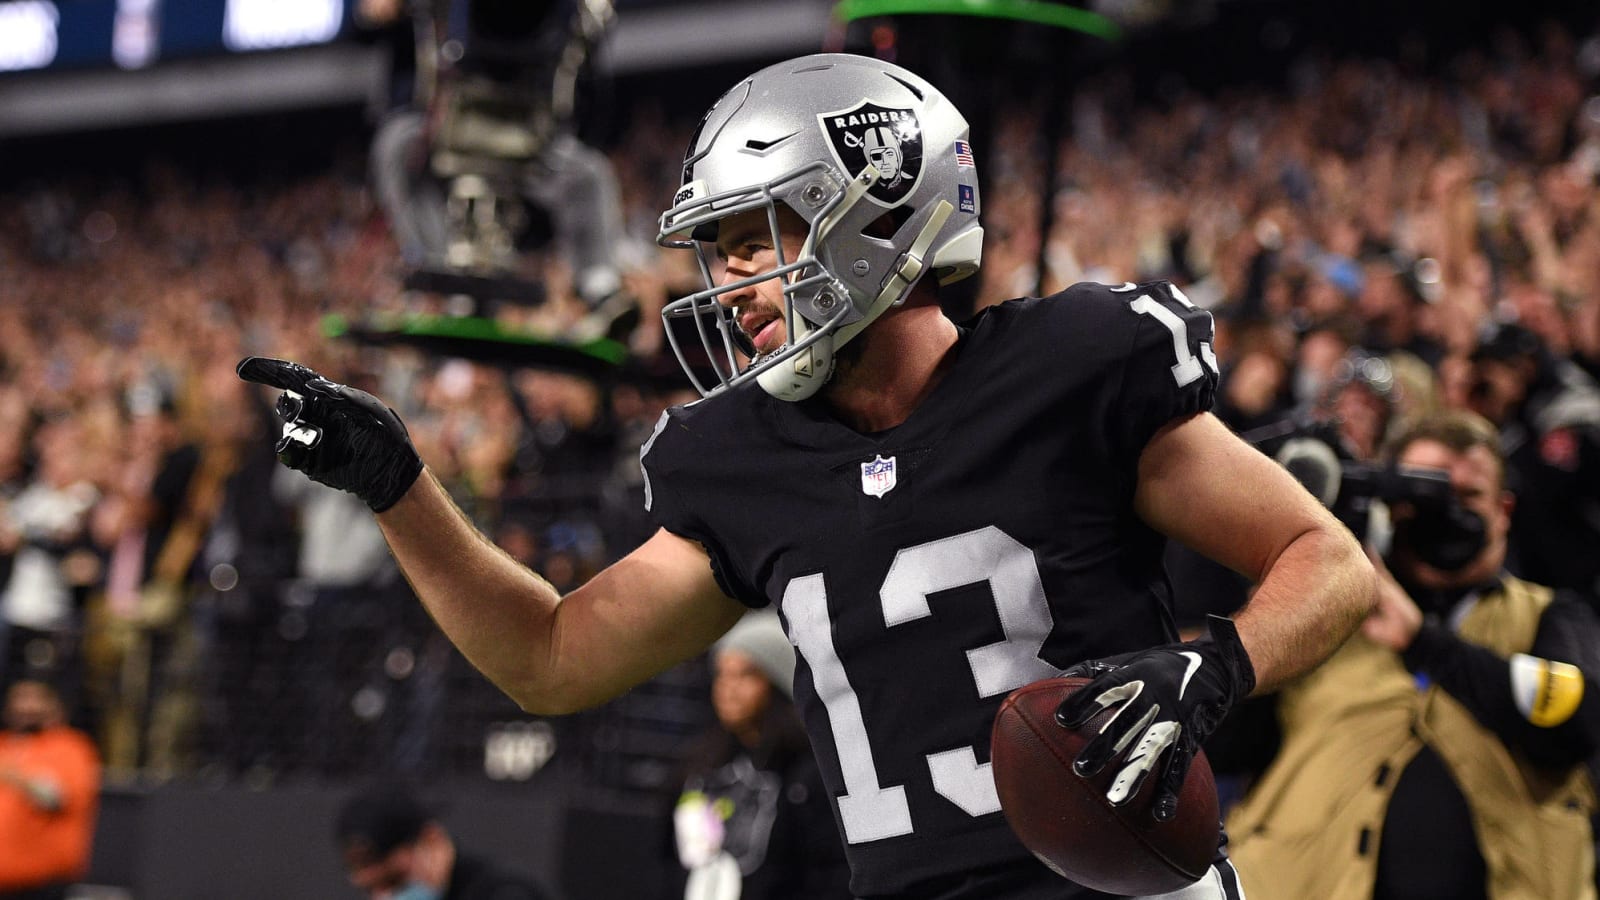 Just win, baby! Raiders defeat Chargers in OT to make playoffs